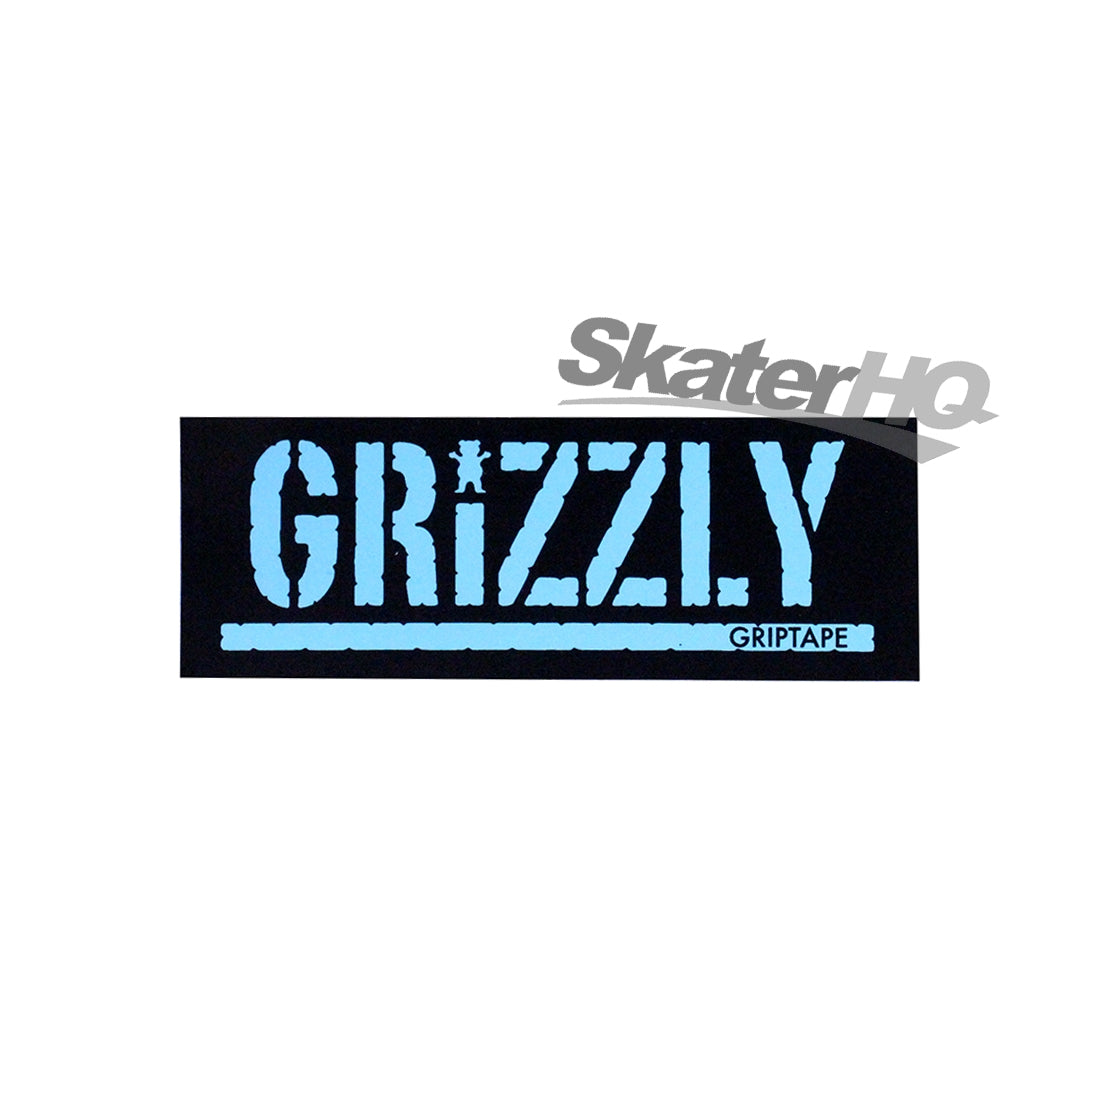 Grizzly Stamp Logo Sticker - Black/Teal Stickers